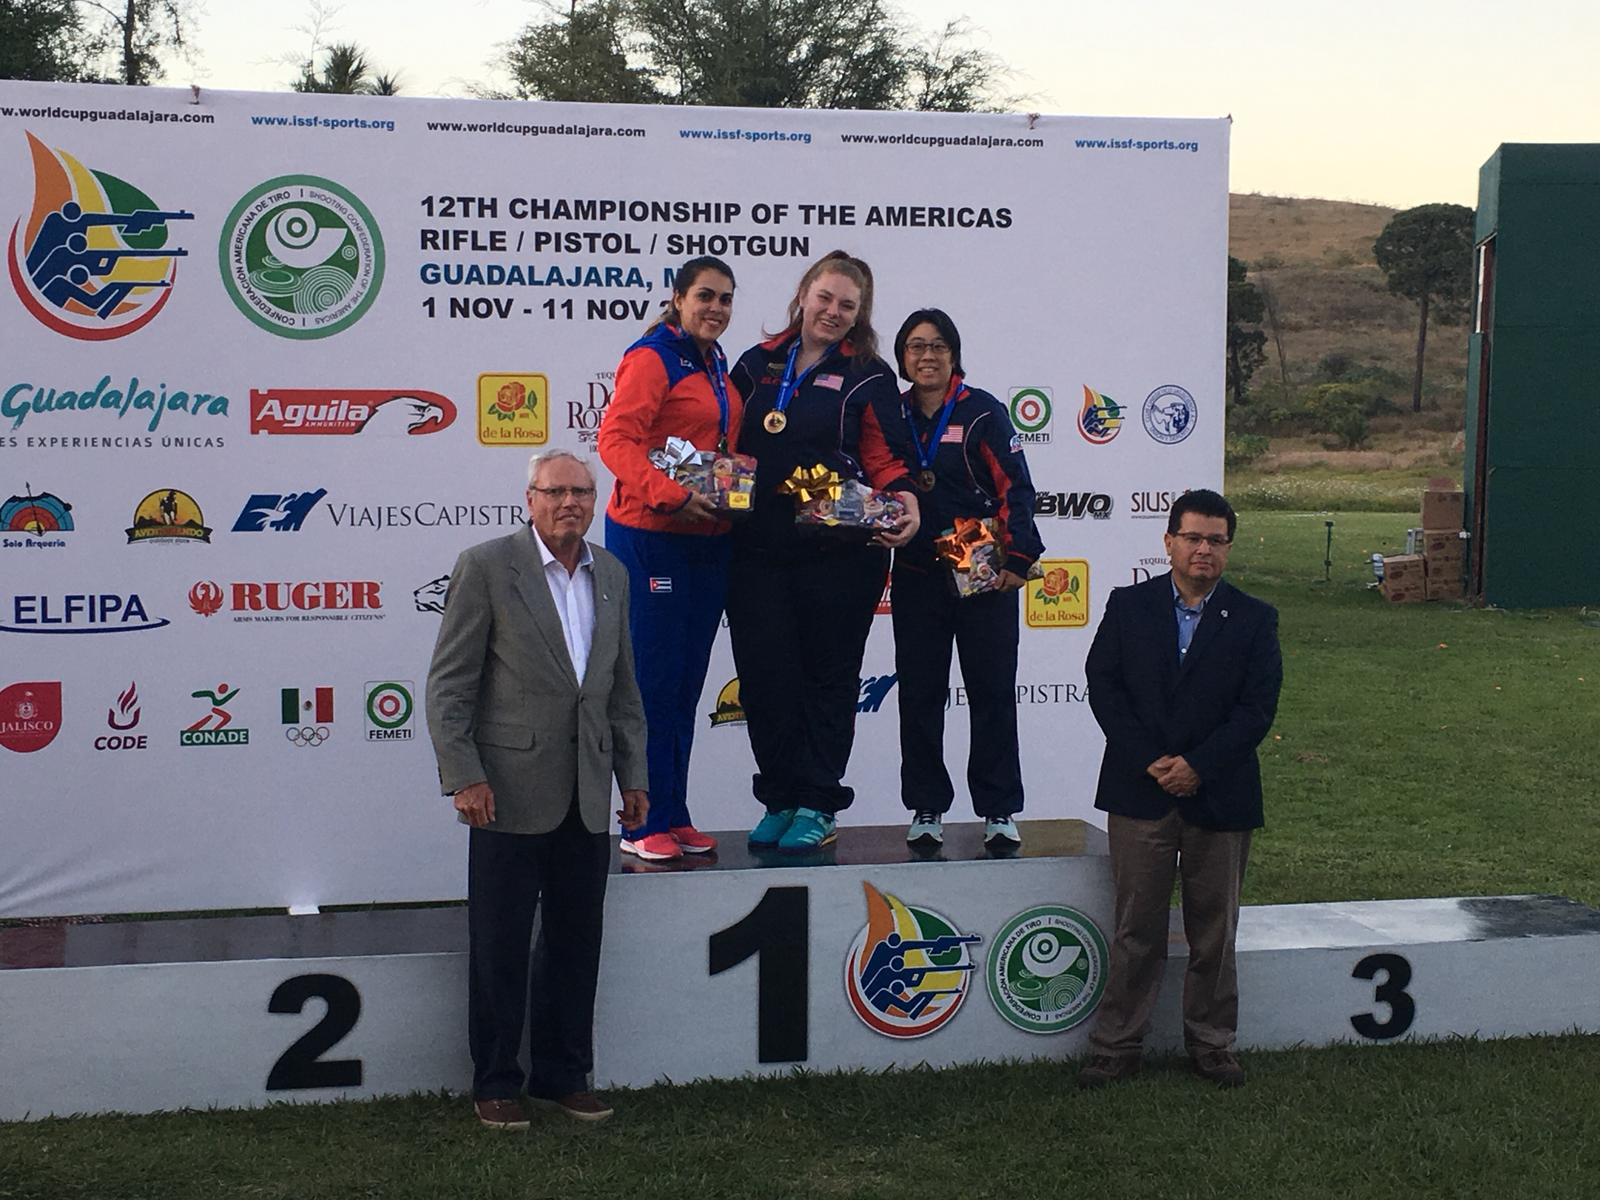 Alexis Lagan of the United States tops the podium in the women’s 25 metres sport pistol at the Championship of the Americas in Mexico ©USA Shooting